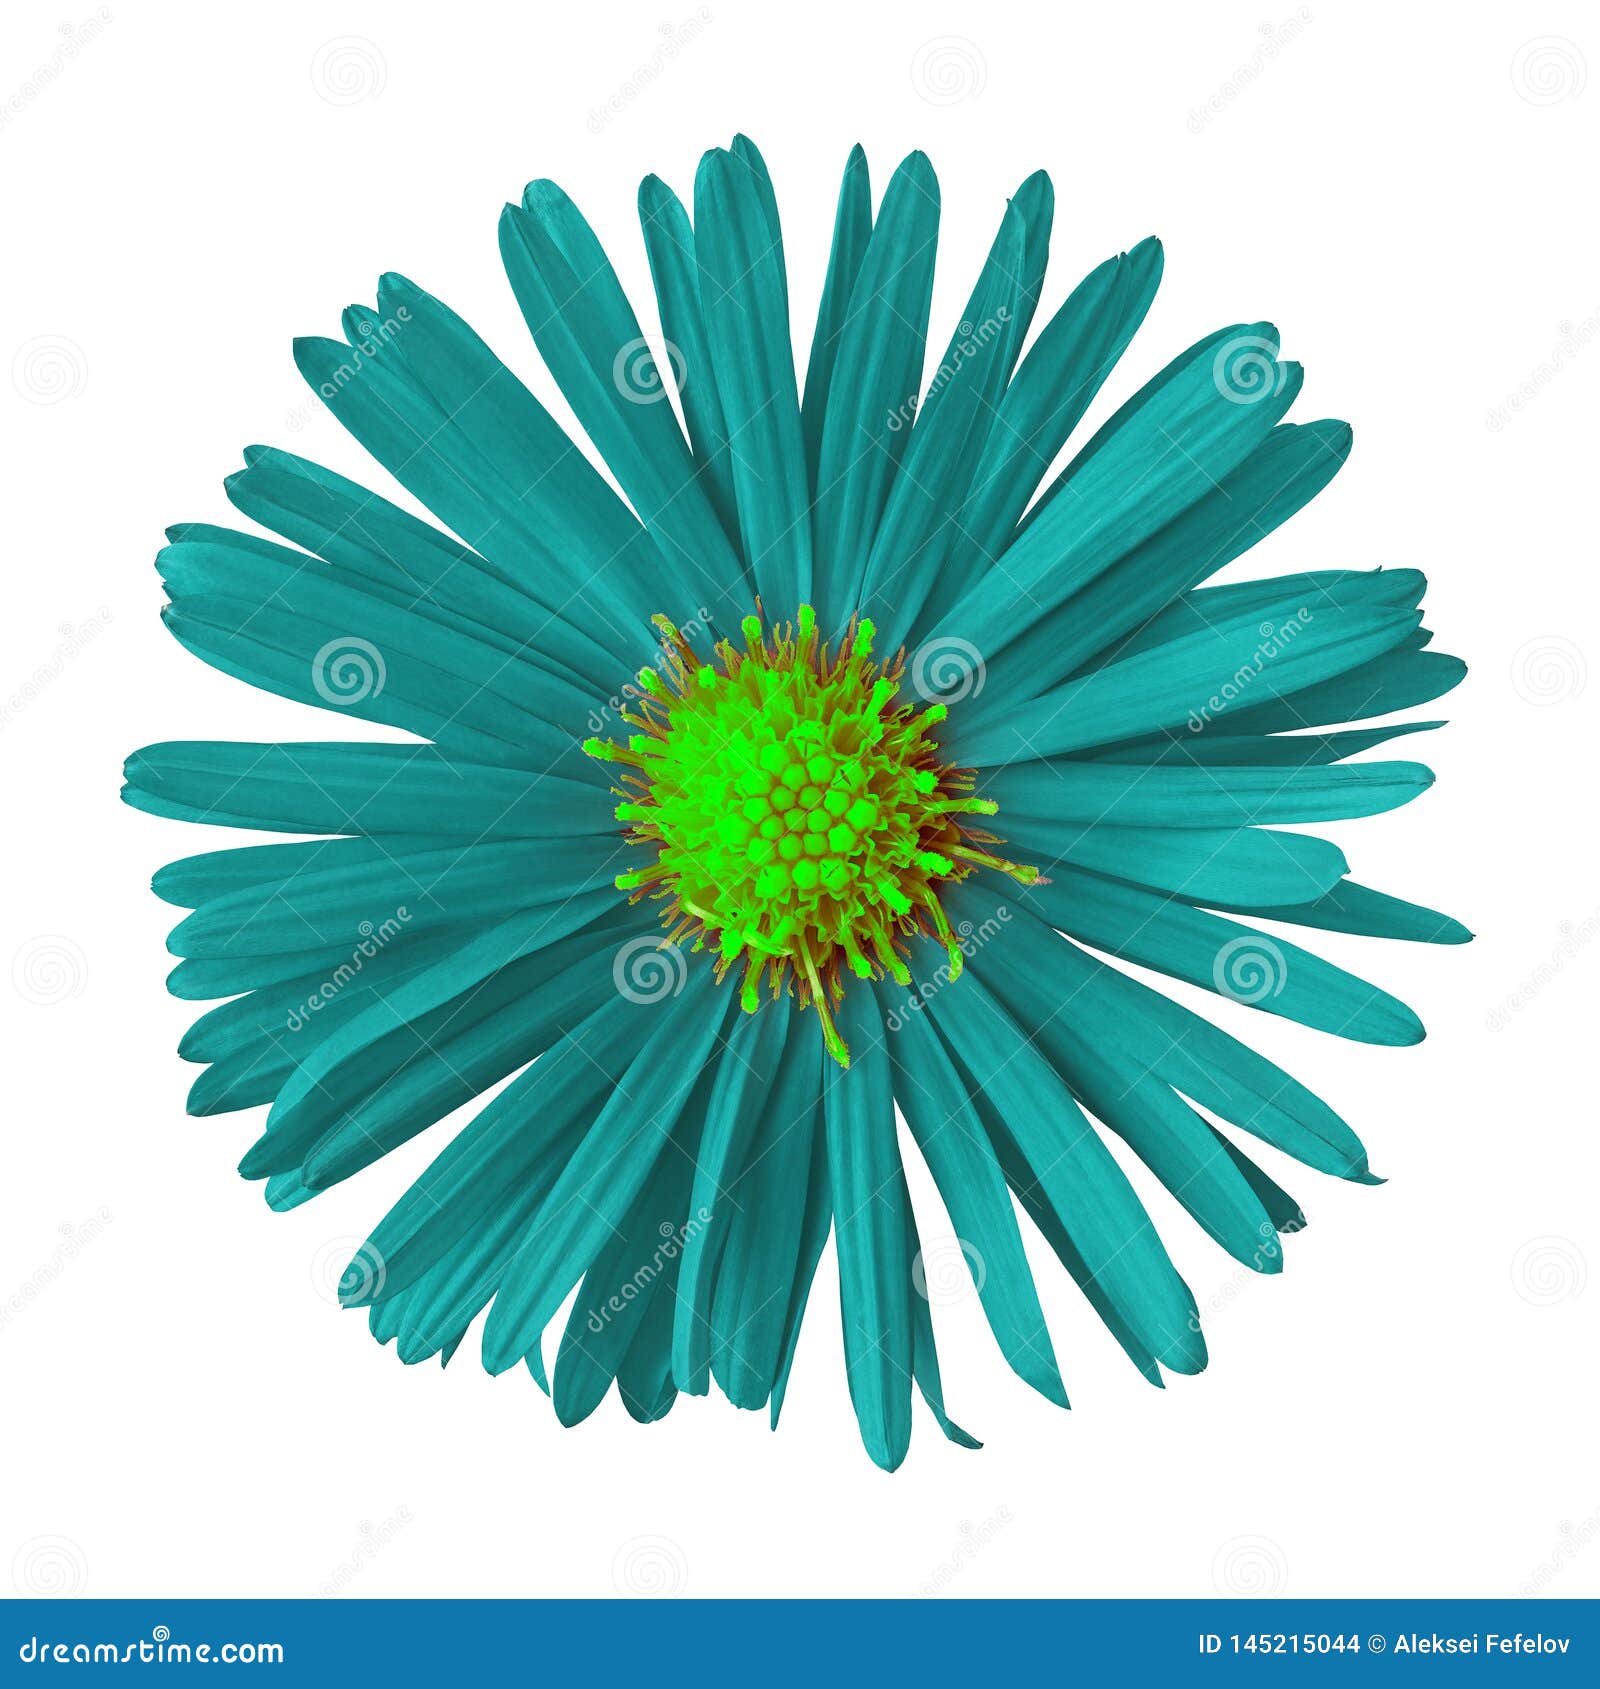 teal chartreuse flower  on white background with clipping path.. close-up.